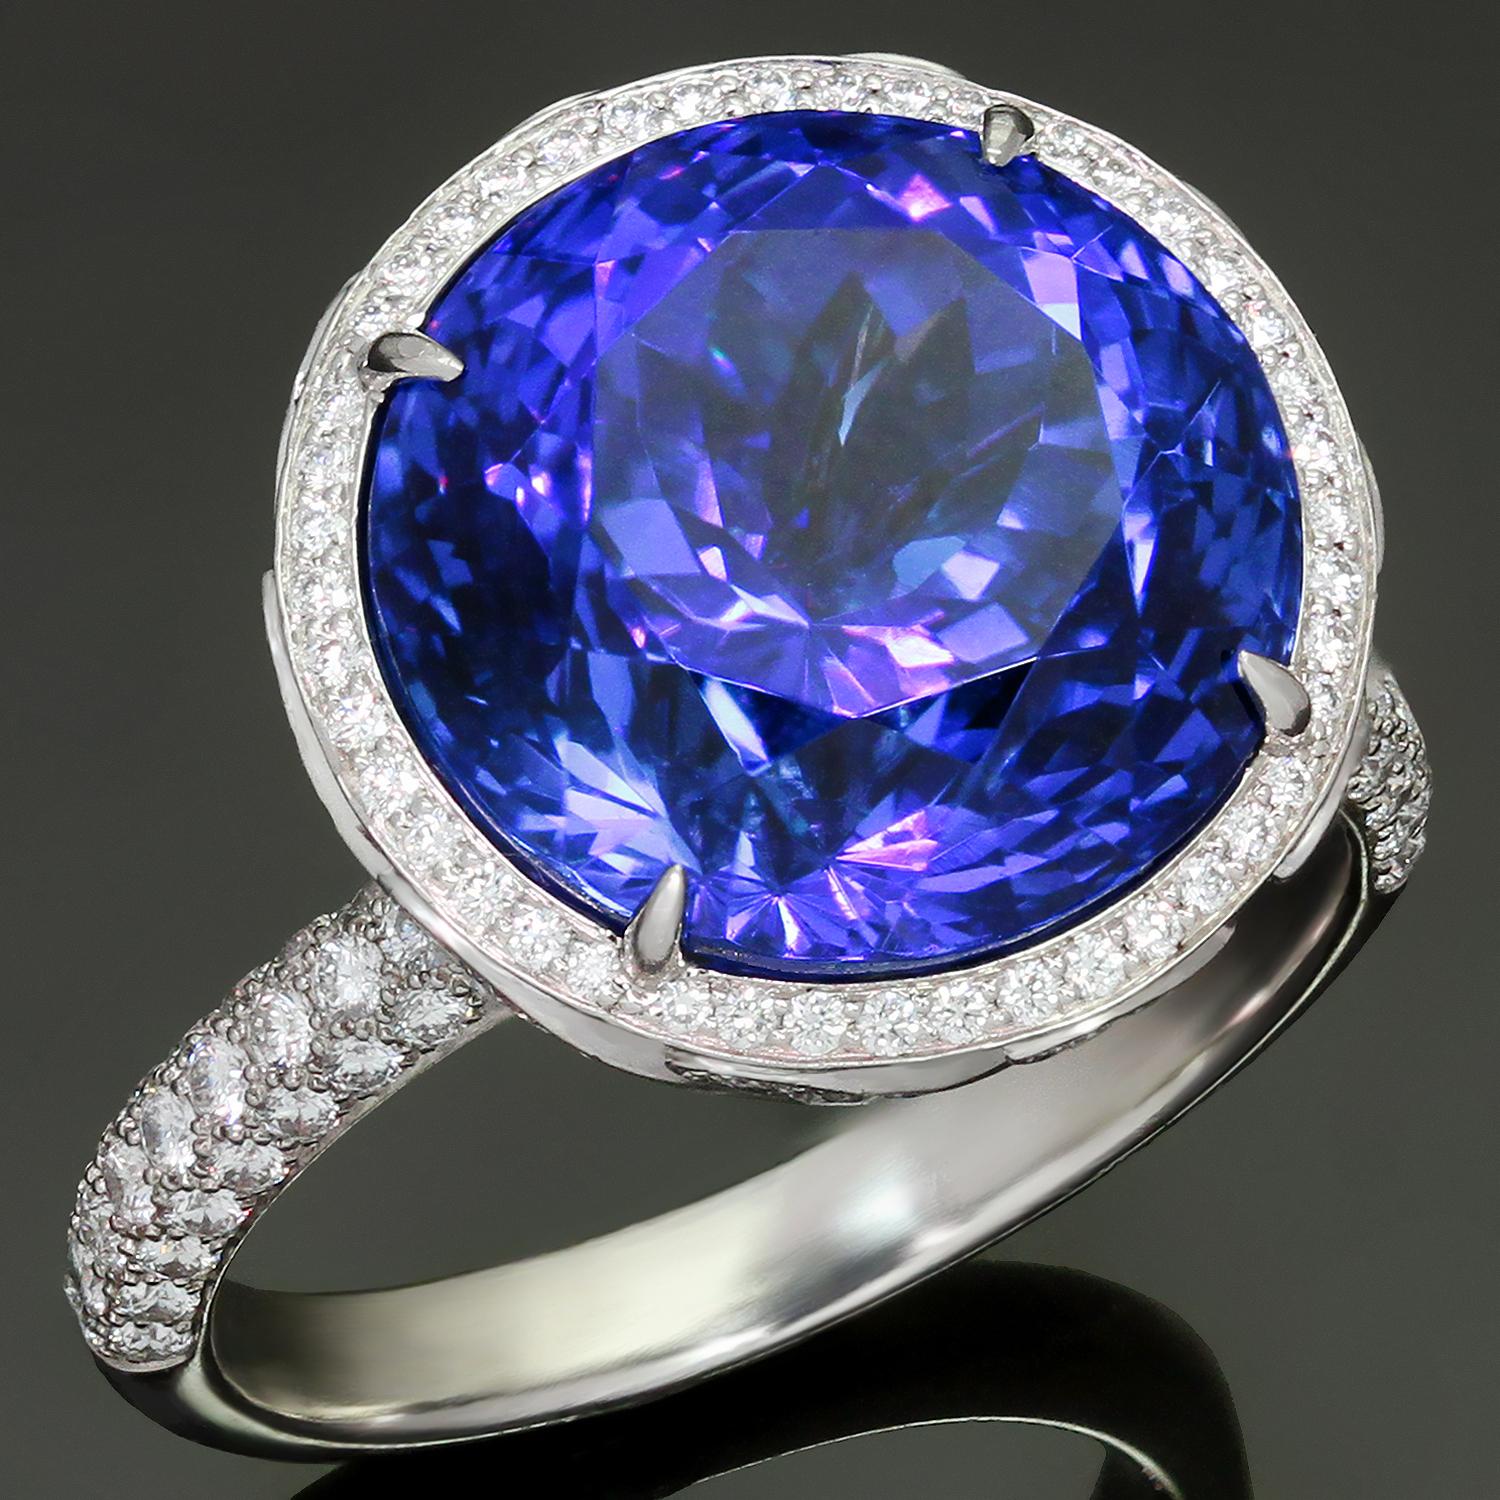 This fabulous cocktail ring from Tiffany's High Jewelry collection is crafted in platinum and set with a lively and sparkling tanzanite in intense blue violet color, weighing an estimated 11.87 carats, and accented with brilliant-cut diamonds